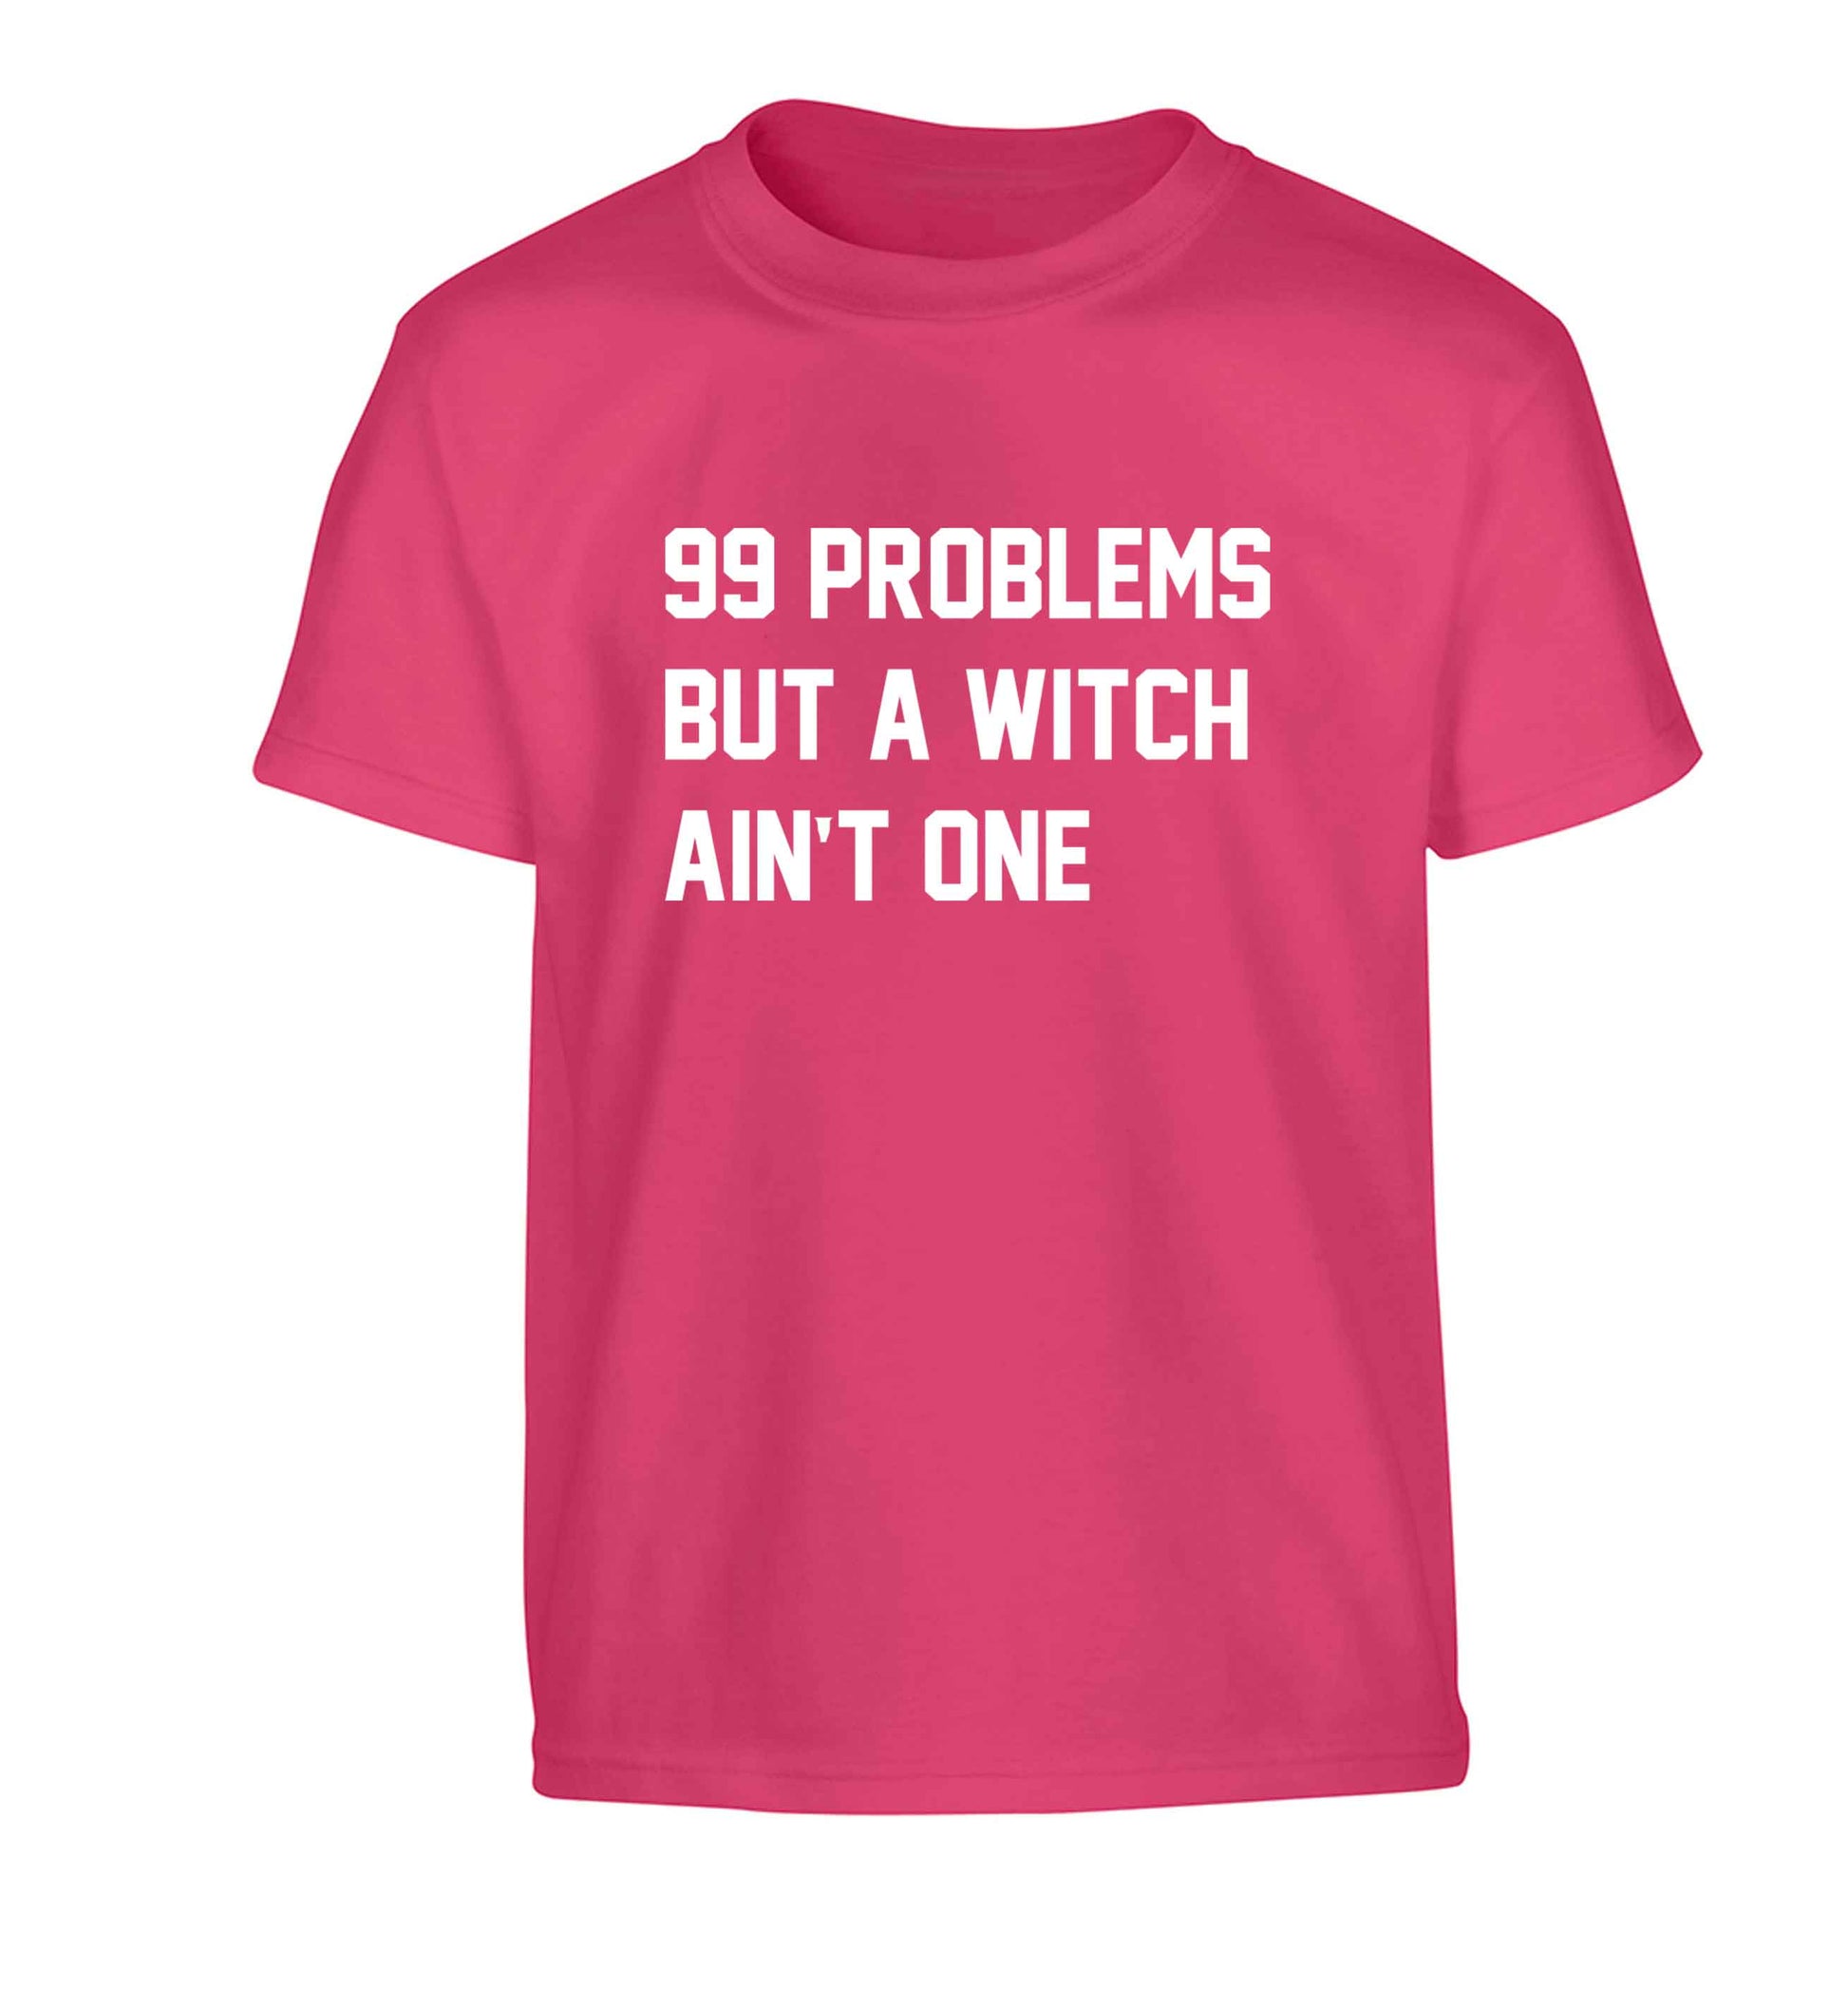 99 Problems but a witch aint one Children's pink Tshirt 12-13 Years